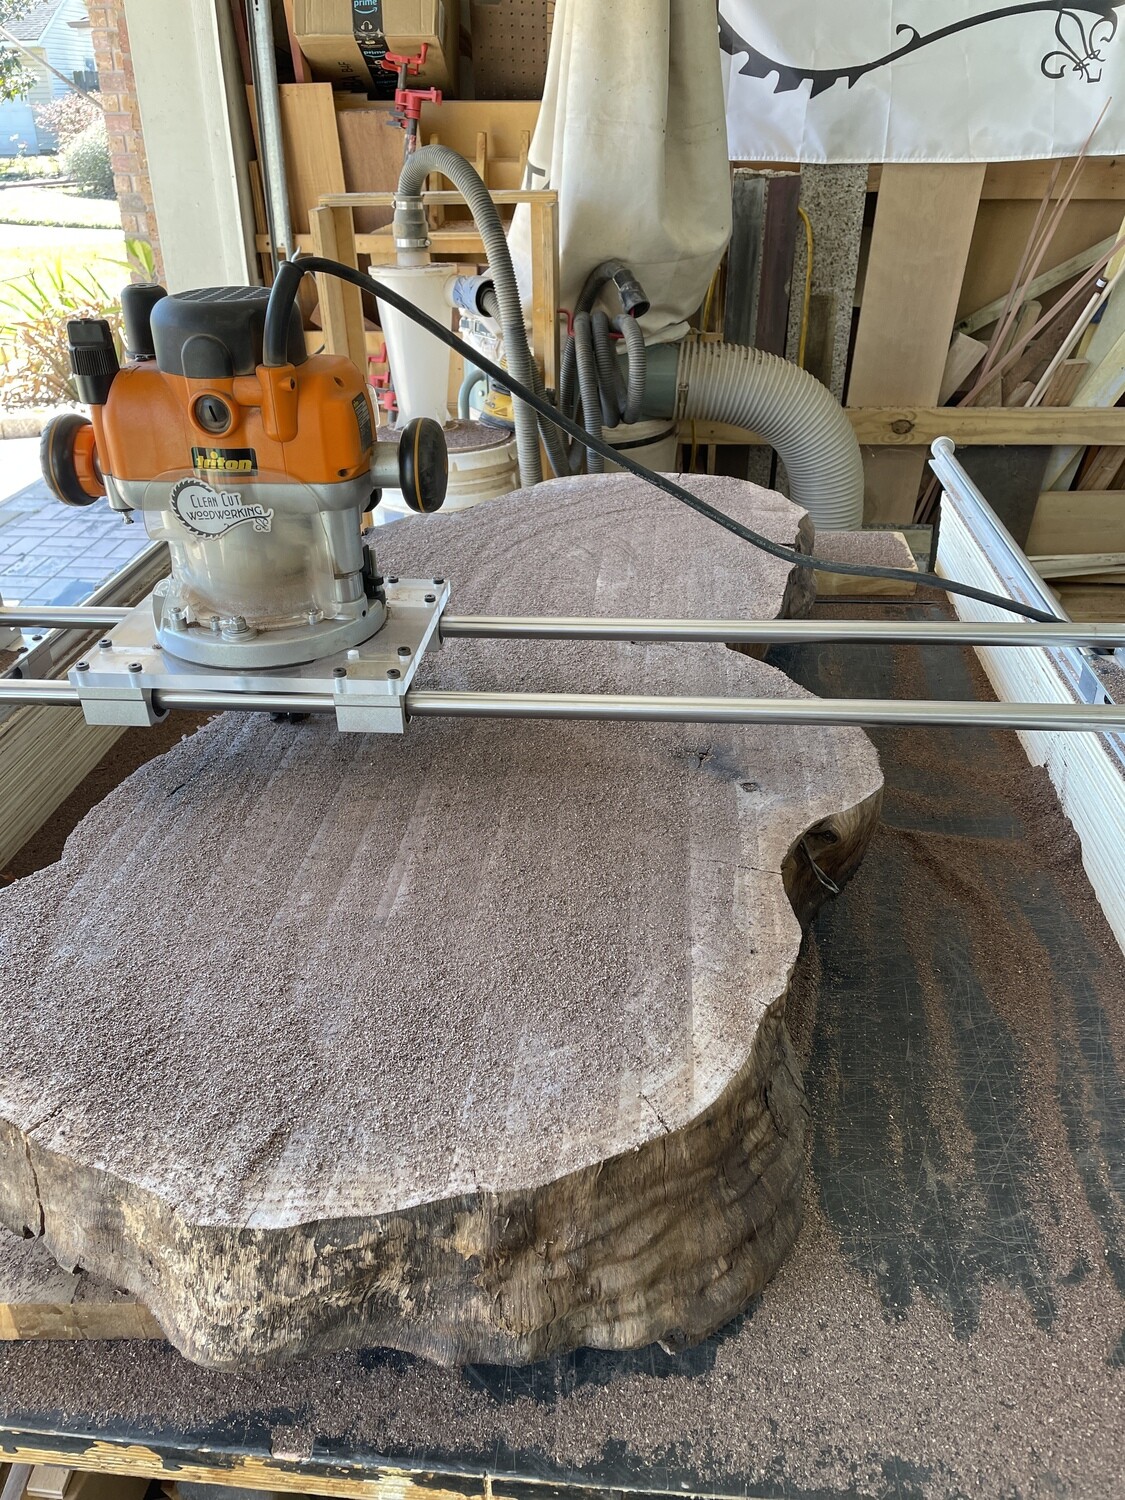 30"x40" Woodworking Router Sled